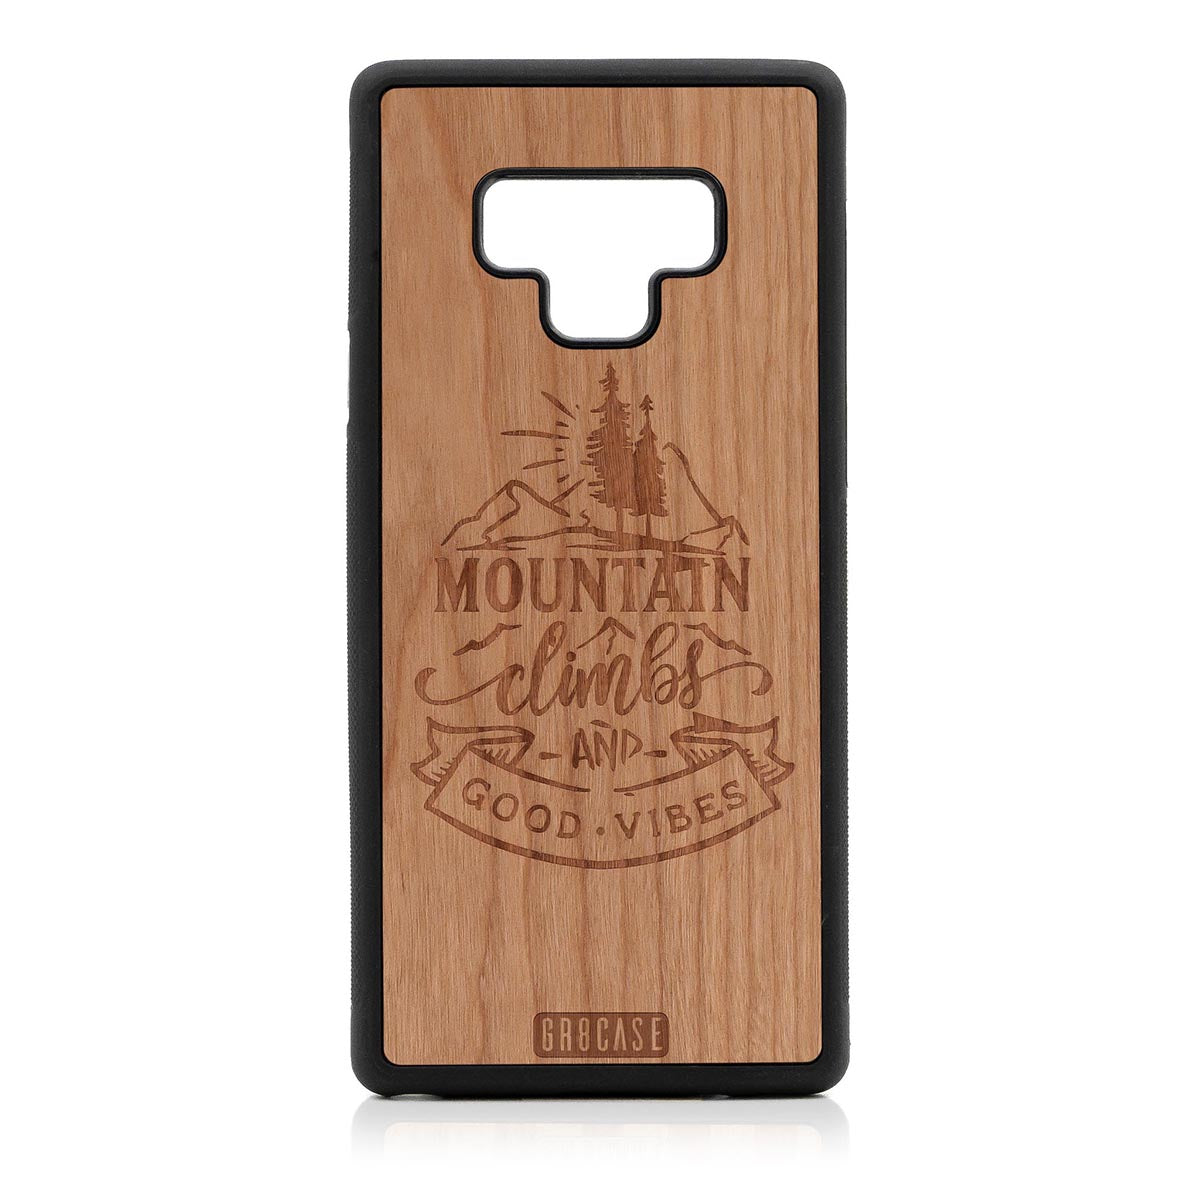 Mountain Climbs And Good Vibes Design Wood Case Samsung Galaxy Note 9 by GR8CASE